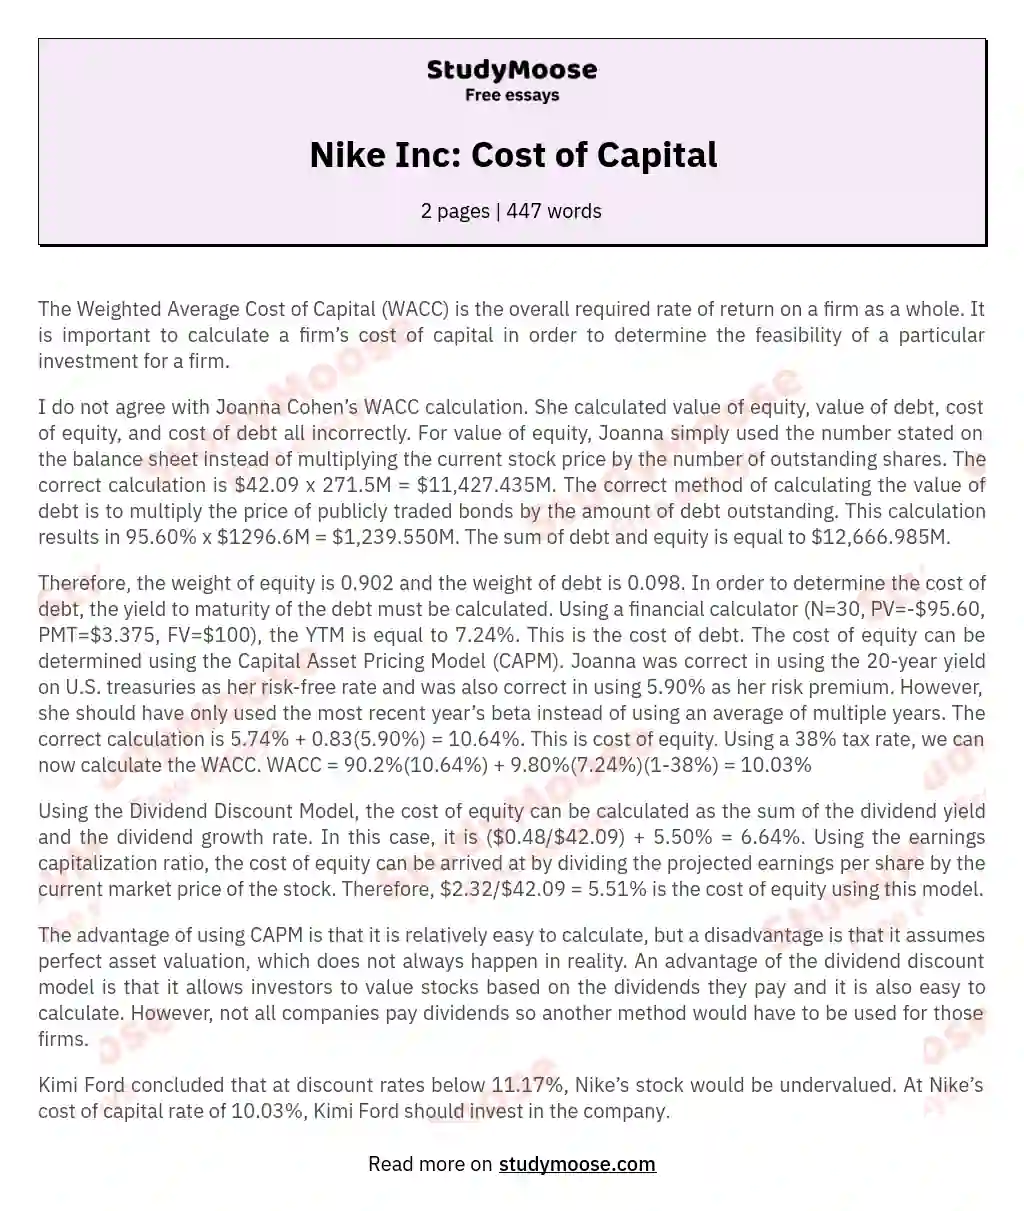 Analyzing the Weighted Average Cost of Capital (WACC) for Nike essay